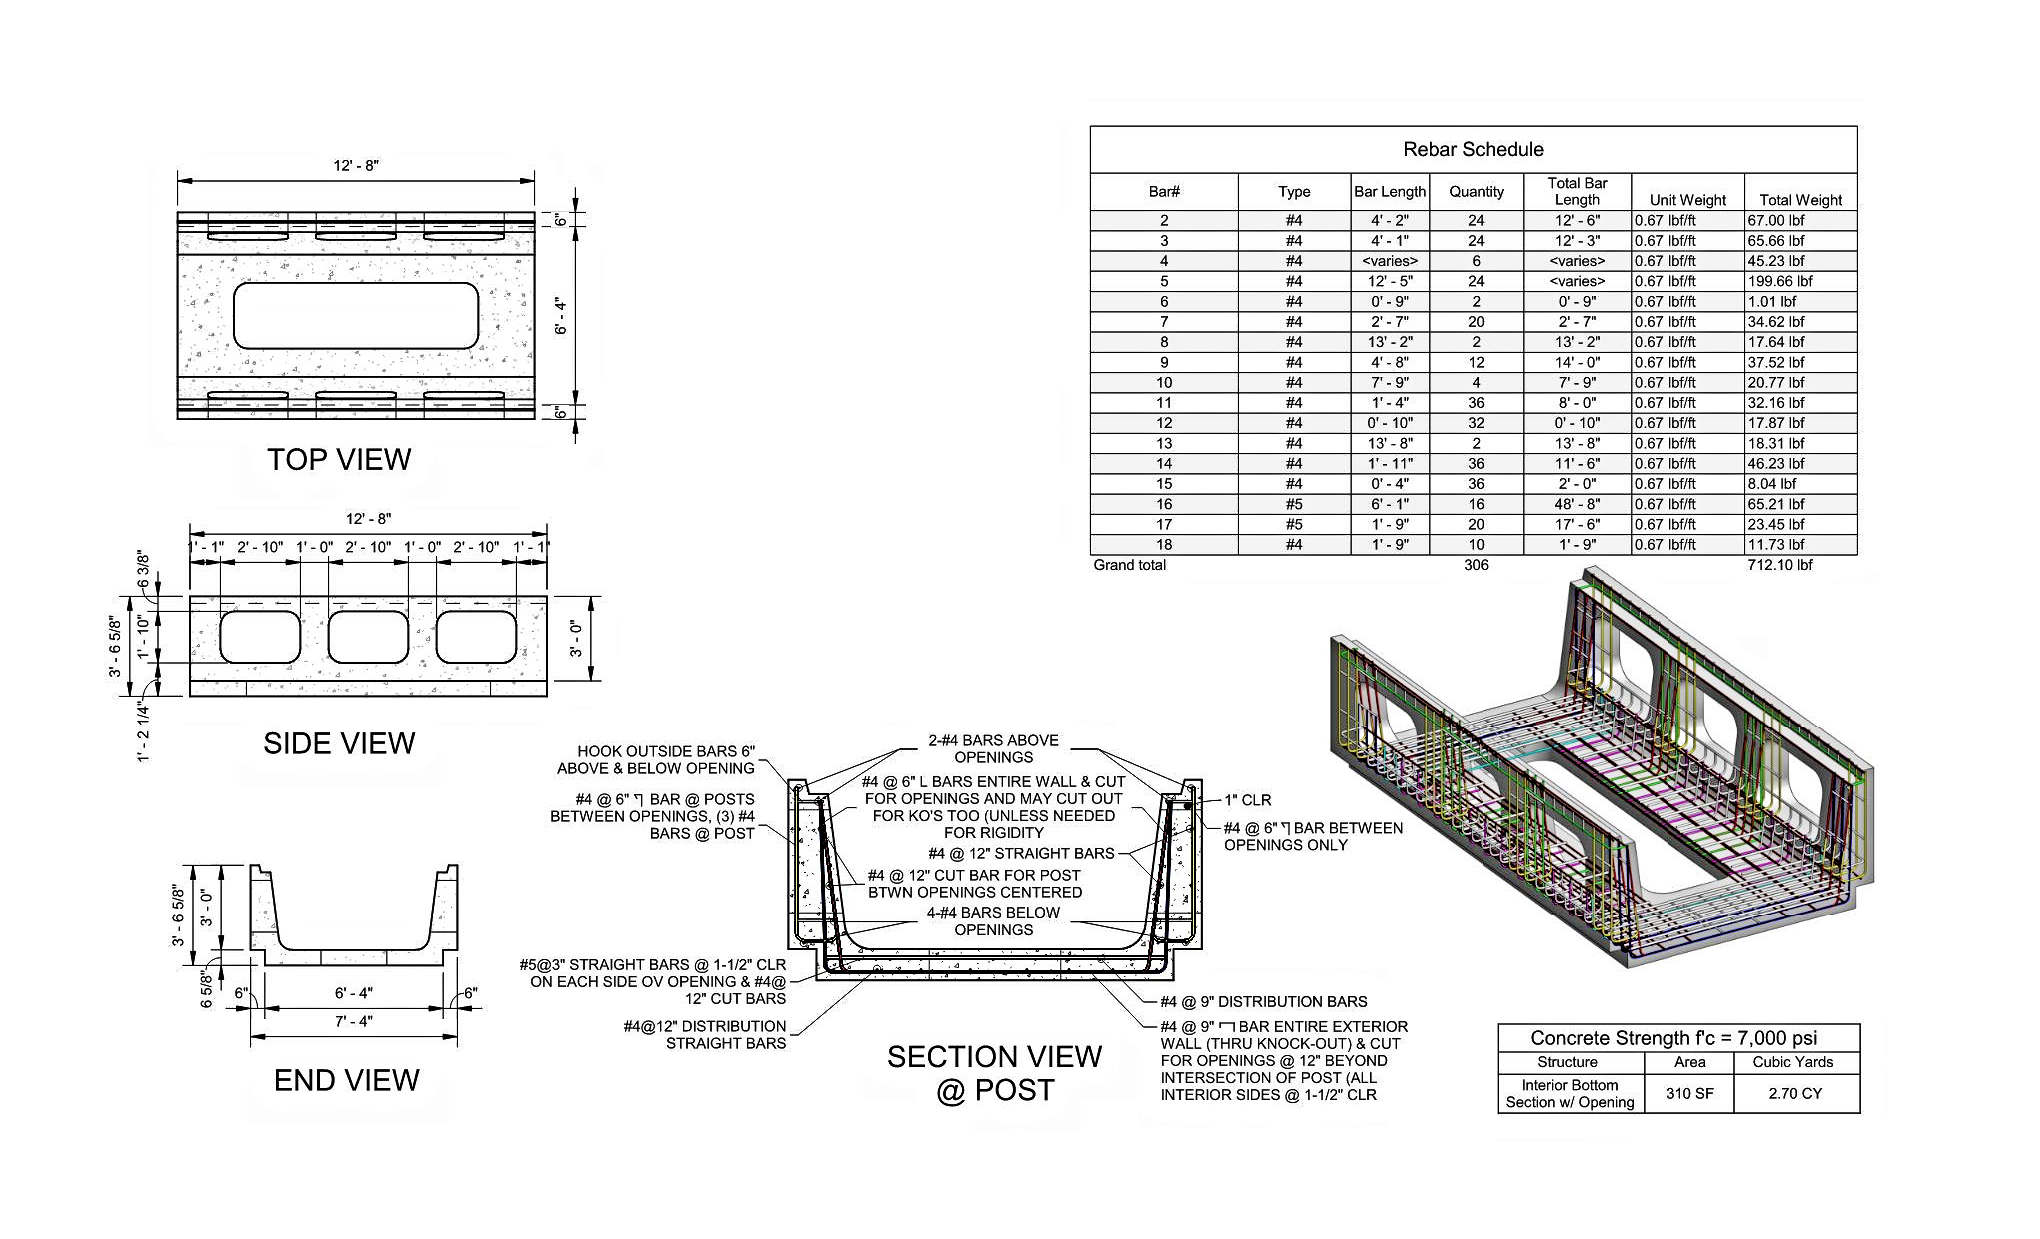 Revit Precast Shop Drawings with Scheduled Reinforcing